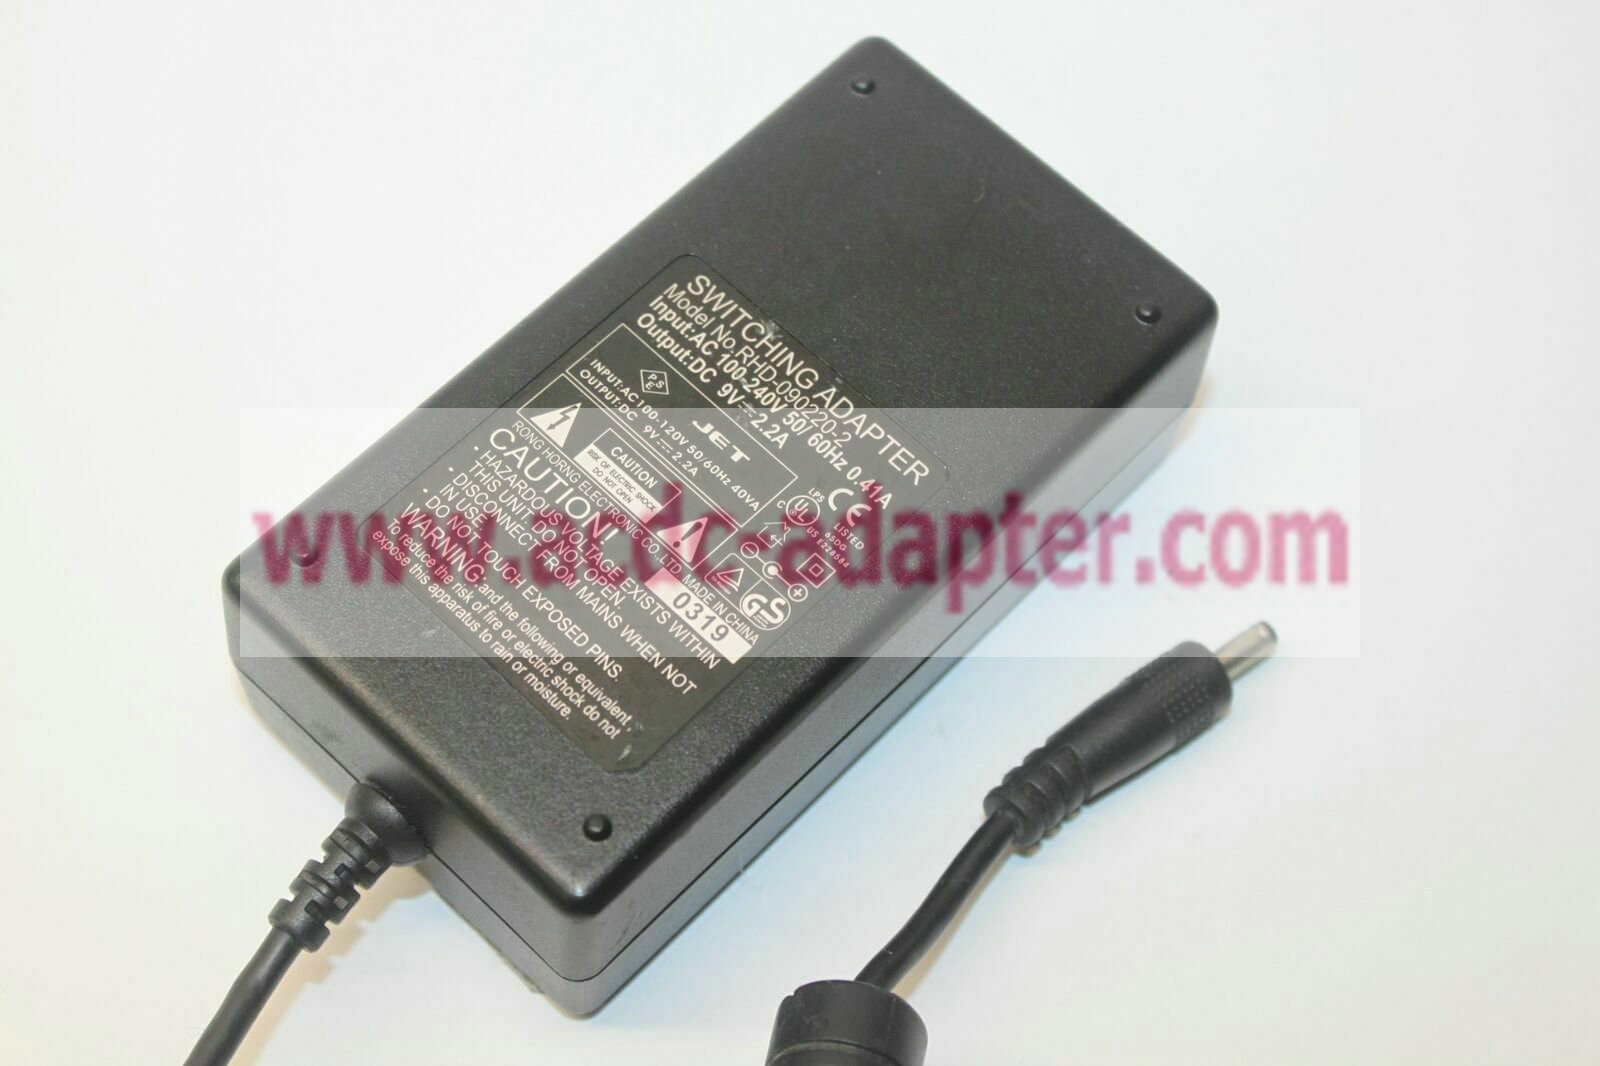 NEW DC 9V 2.2A JET RHD-090220-2 Switching Power Supply AC Adapter - Click Image to Close